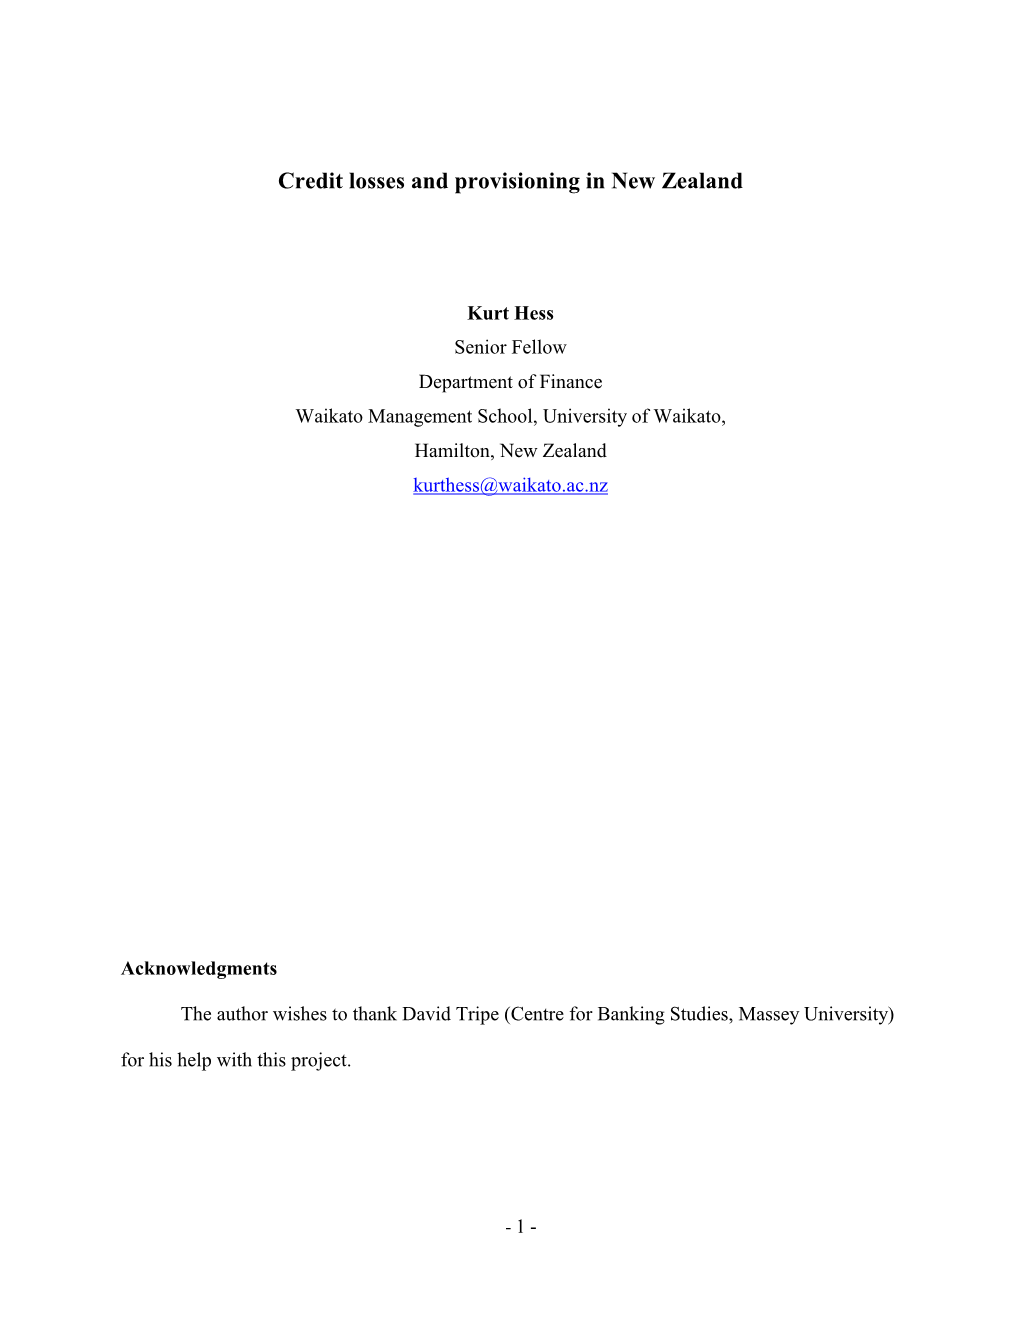 Credit Losses and Provisioning in New Zealand